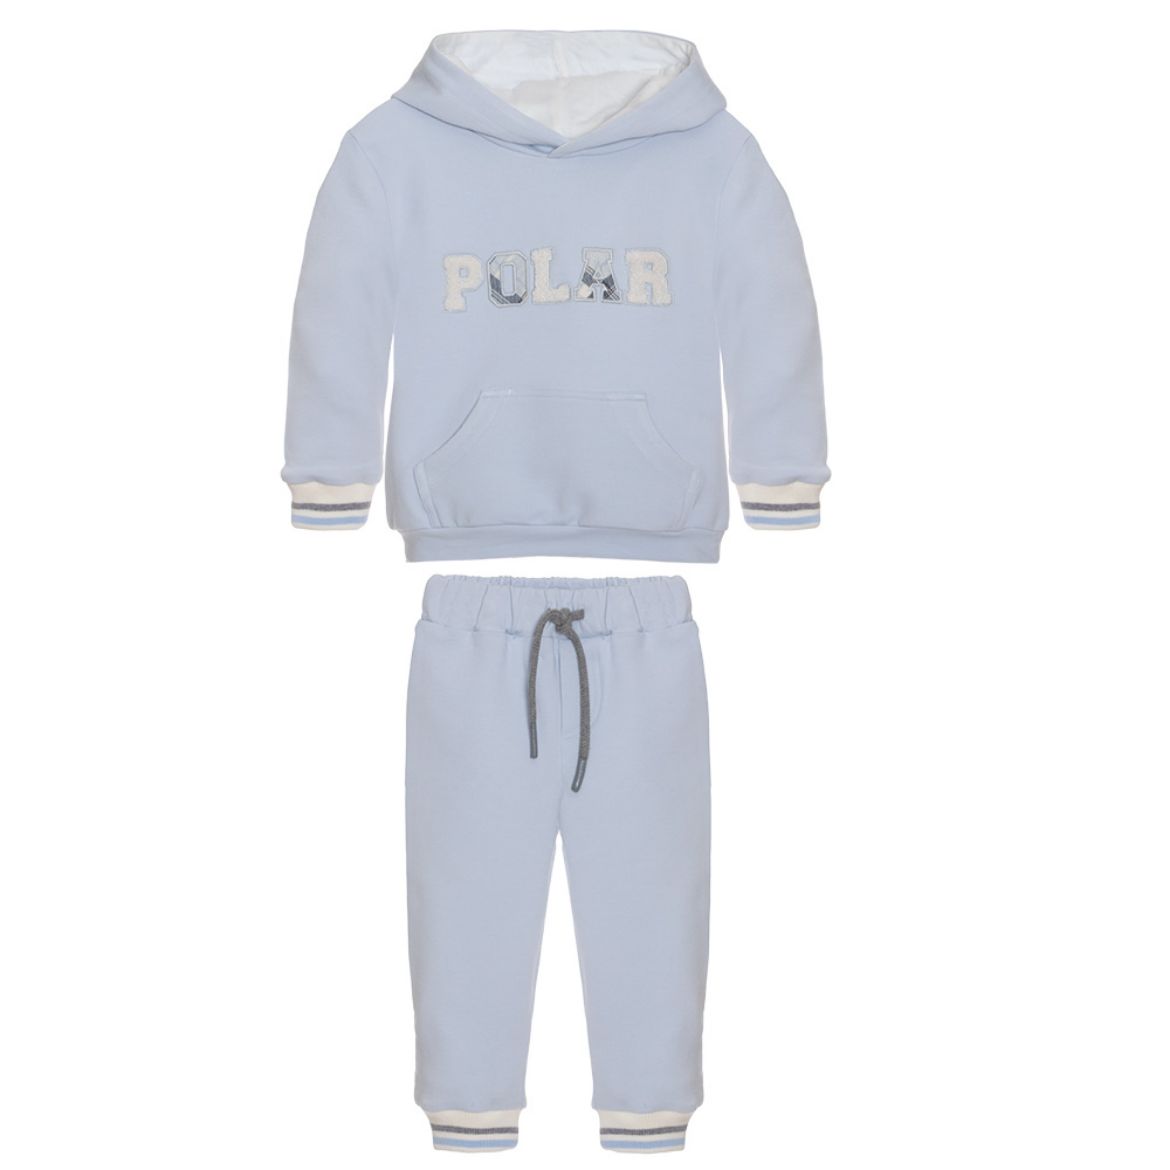 Picture of Patachou Boys Blue Hooded 'Polar' Tracksuit